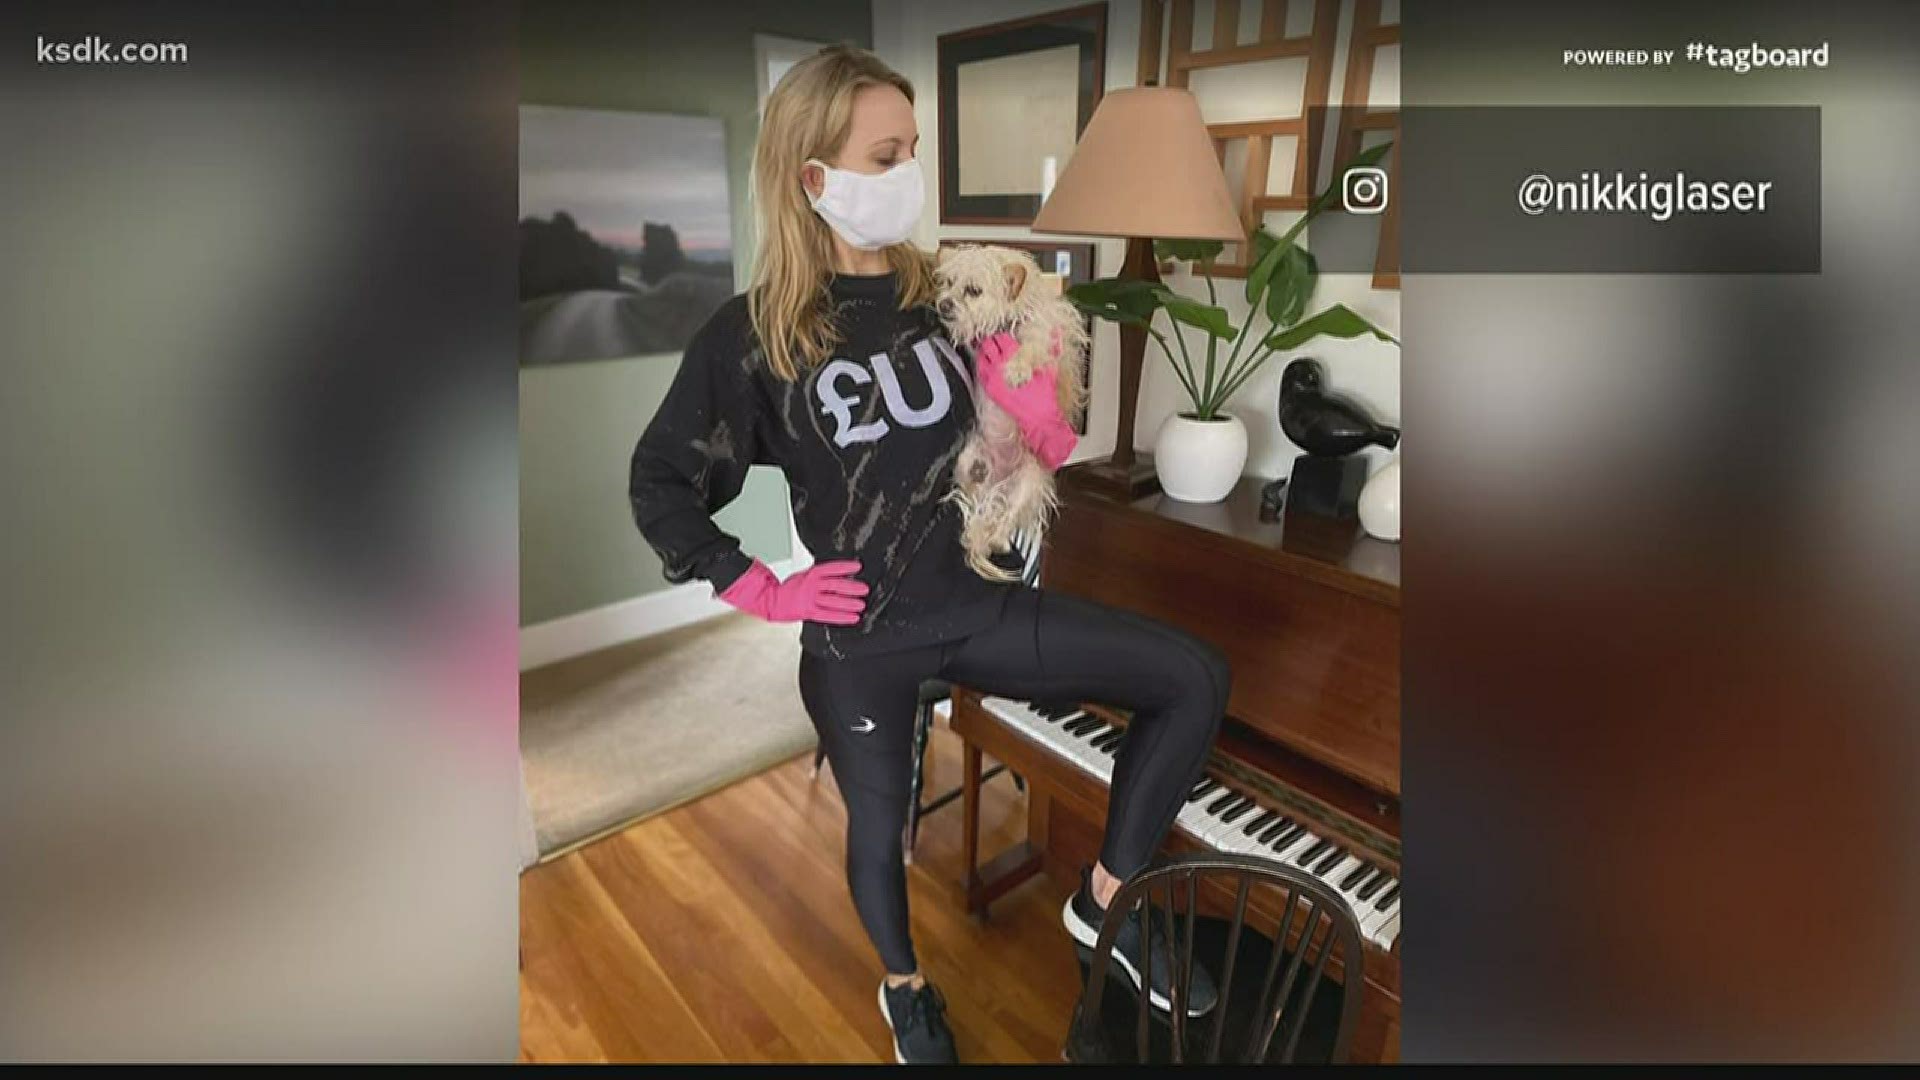 Comedian Nikki Glaser riding out the pandemic in her childhood home.